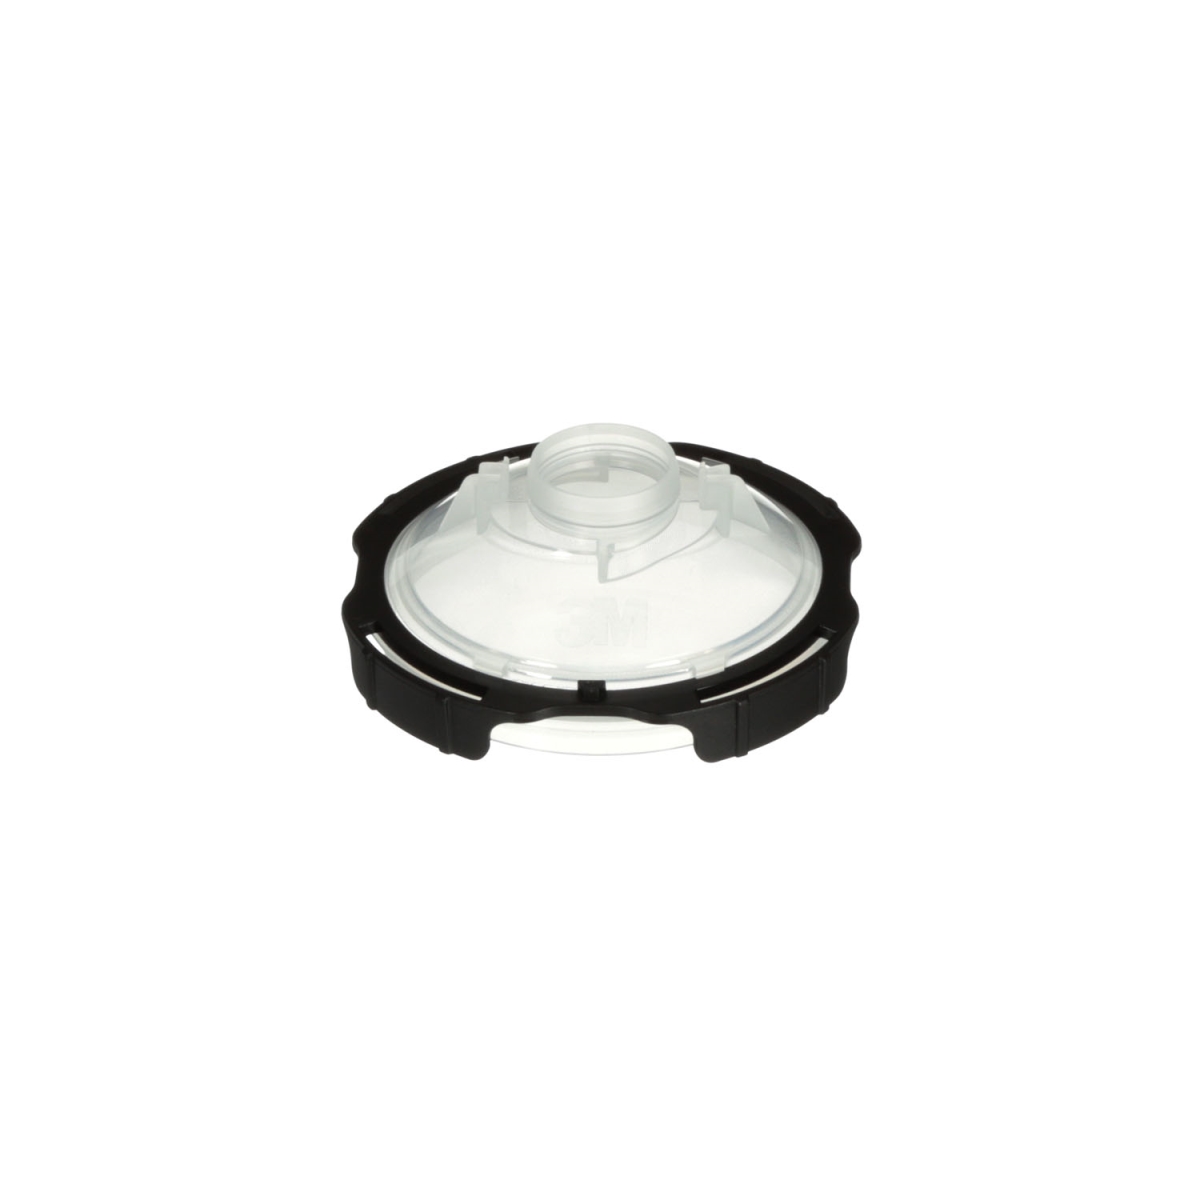 2ps-26204 Pps 2.0 Lid Small 200u 25 By C